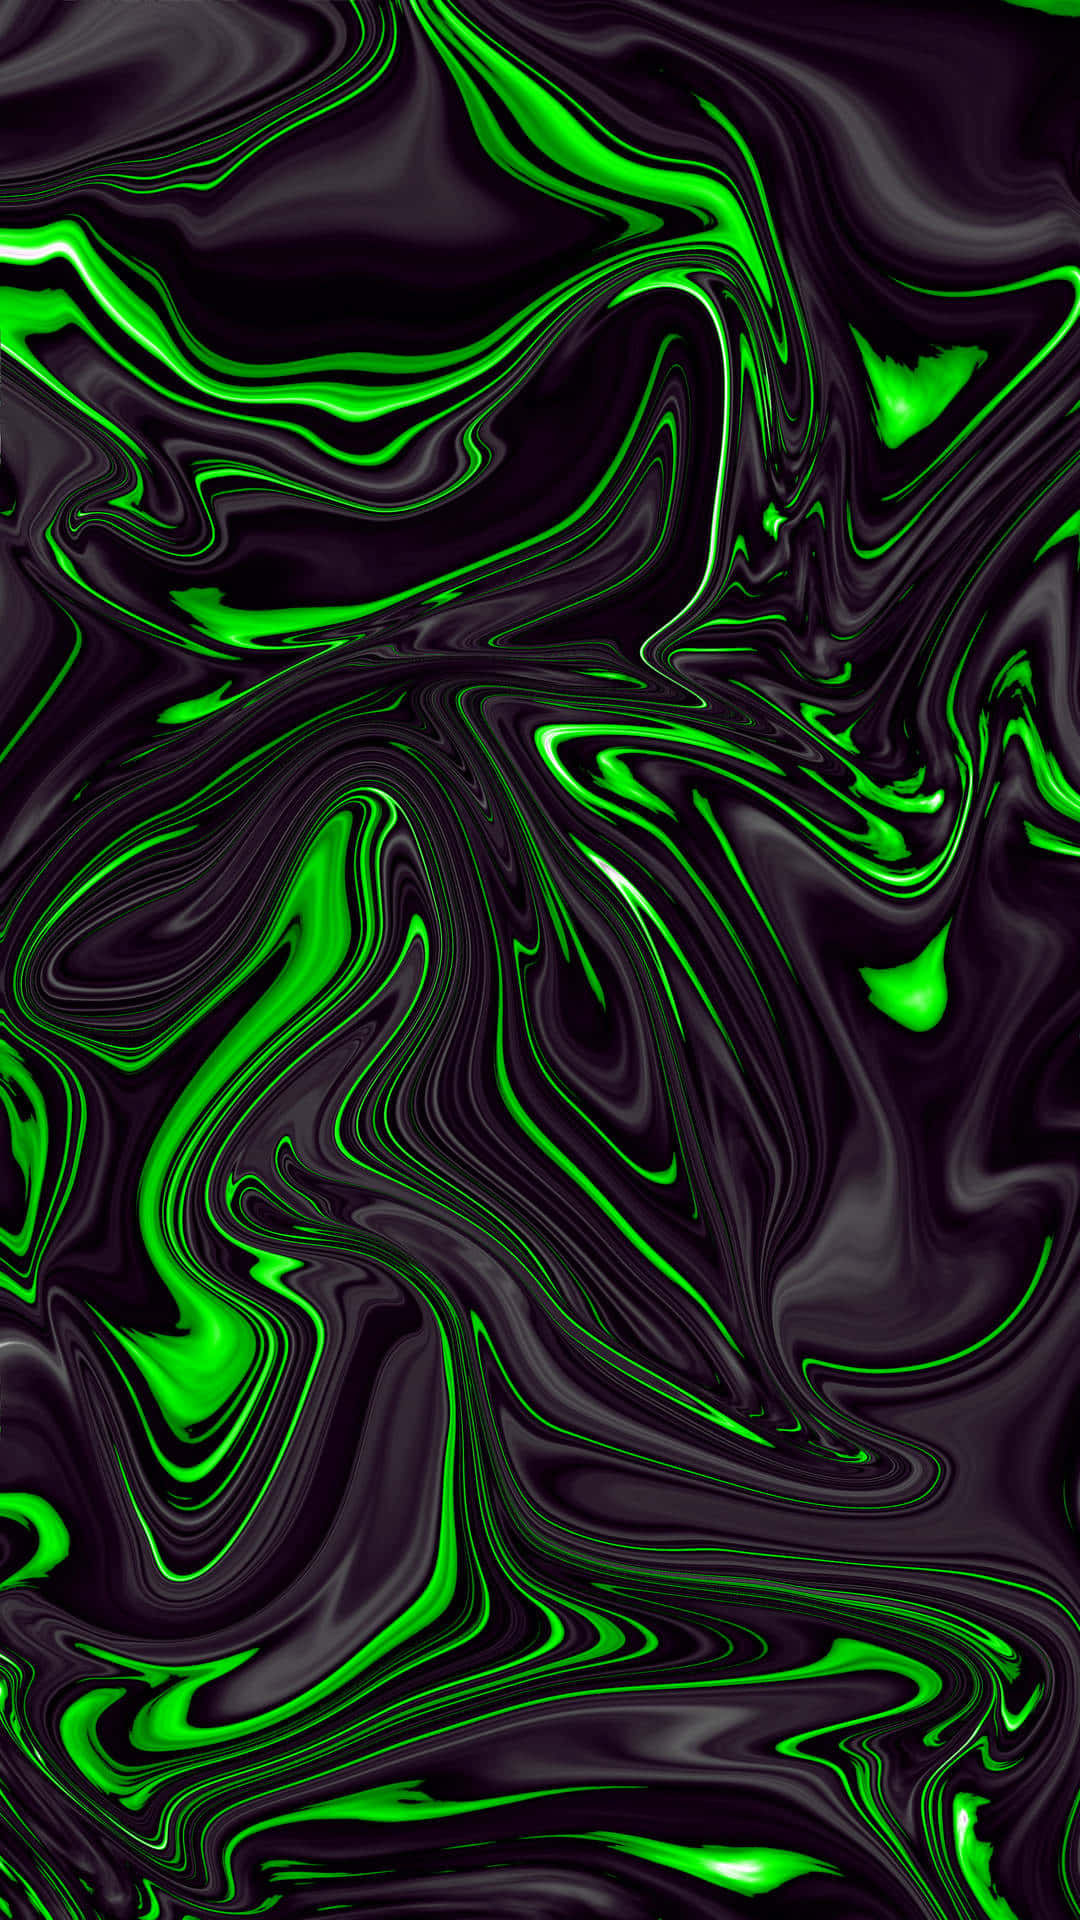 Mesmerizing black and green abstract background